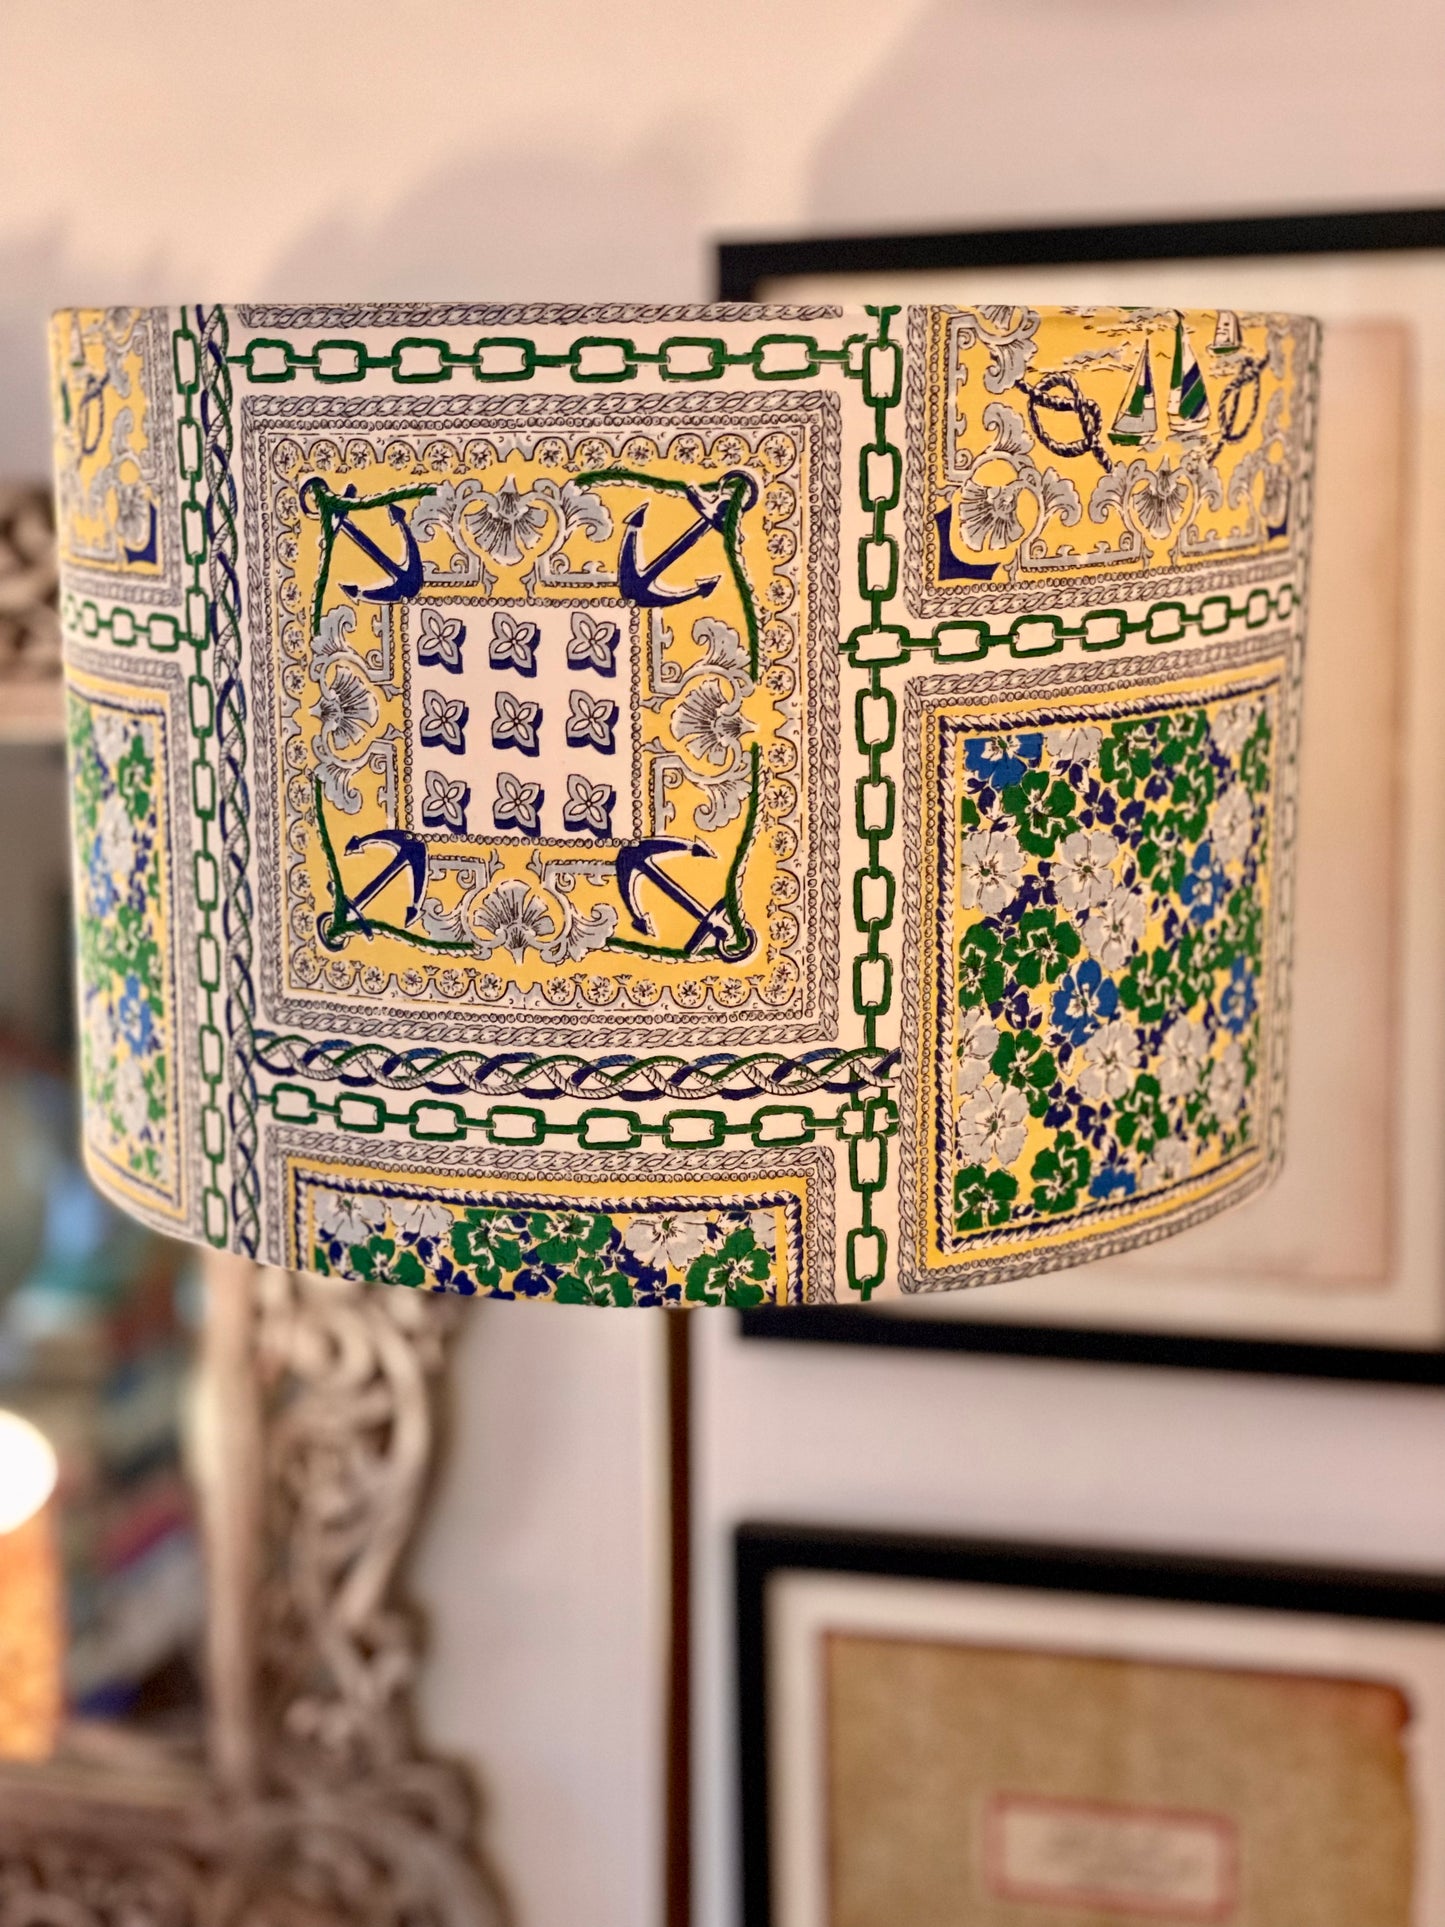 12 Inch Drum Lampshade. Japanese Cotton Lawn. Yellow, Blue, Green, and White Nautical Motif.